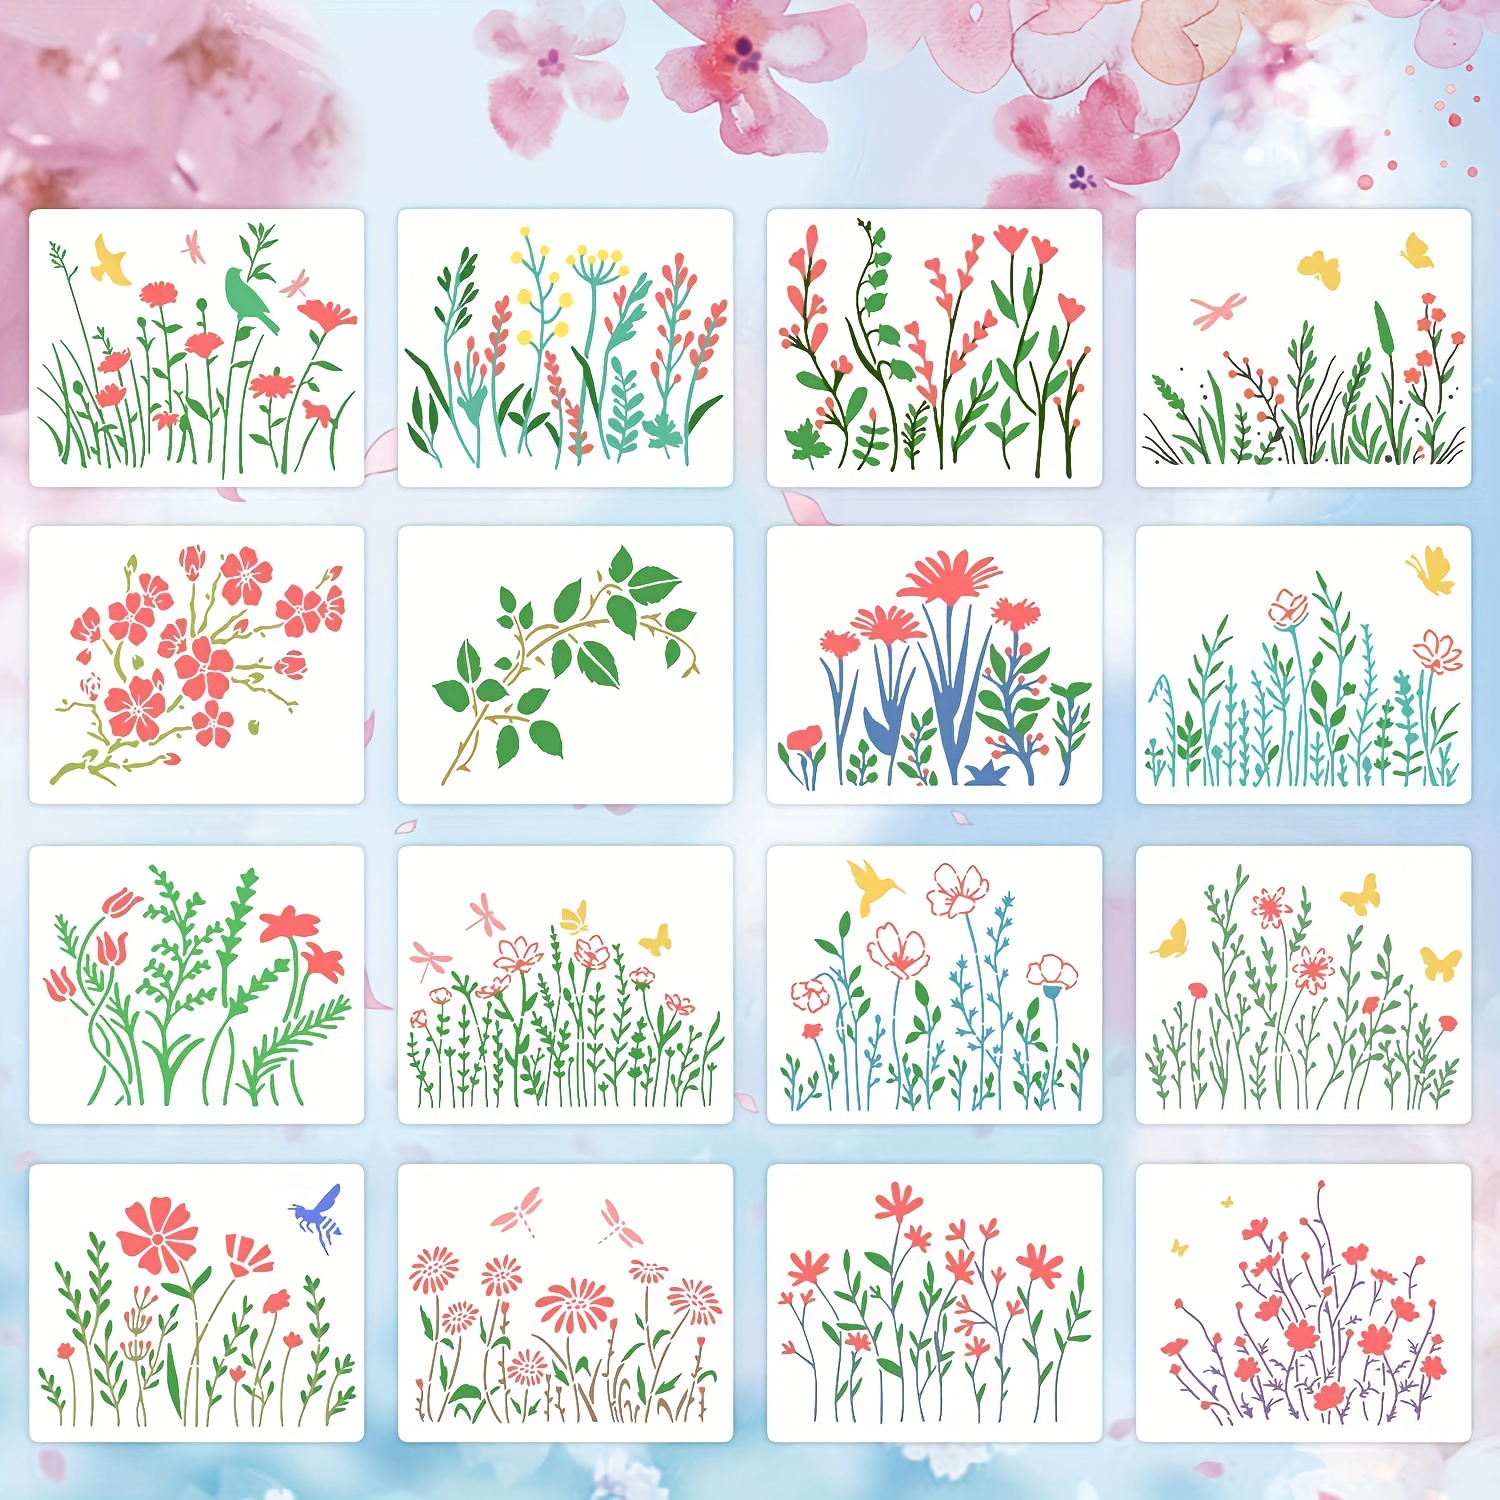 

16pcs Reusable Flowers Painting Stencils, Crafts Stencils, For Diy Painting Scrapbook, Wood, Wall, Floor, Furniture Crafts, Home Decor Art Supplies, Funny Christmas Gifts